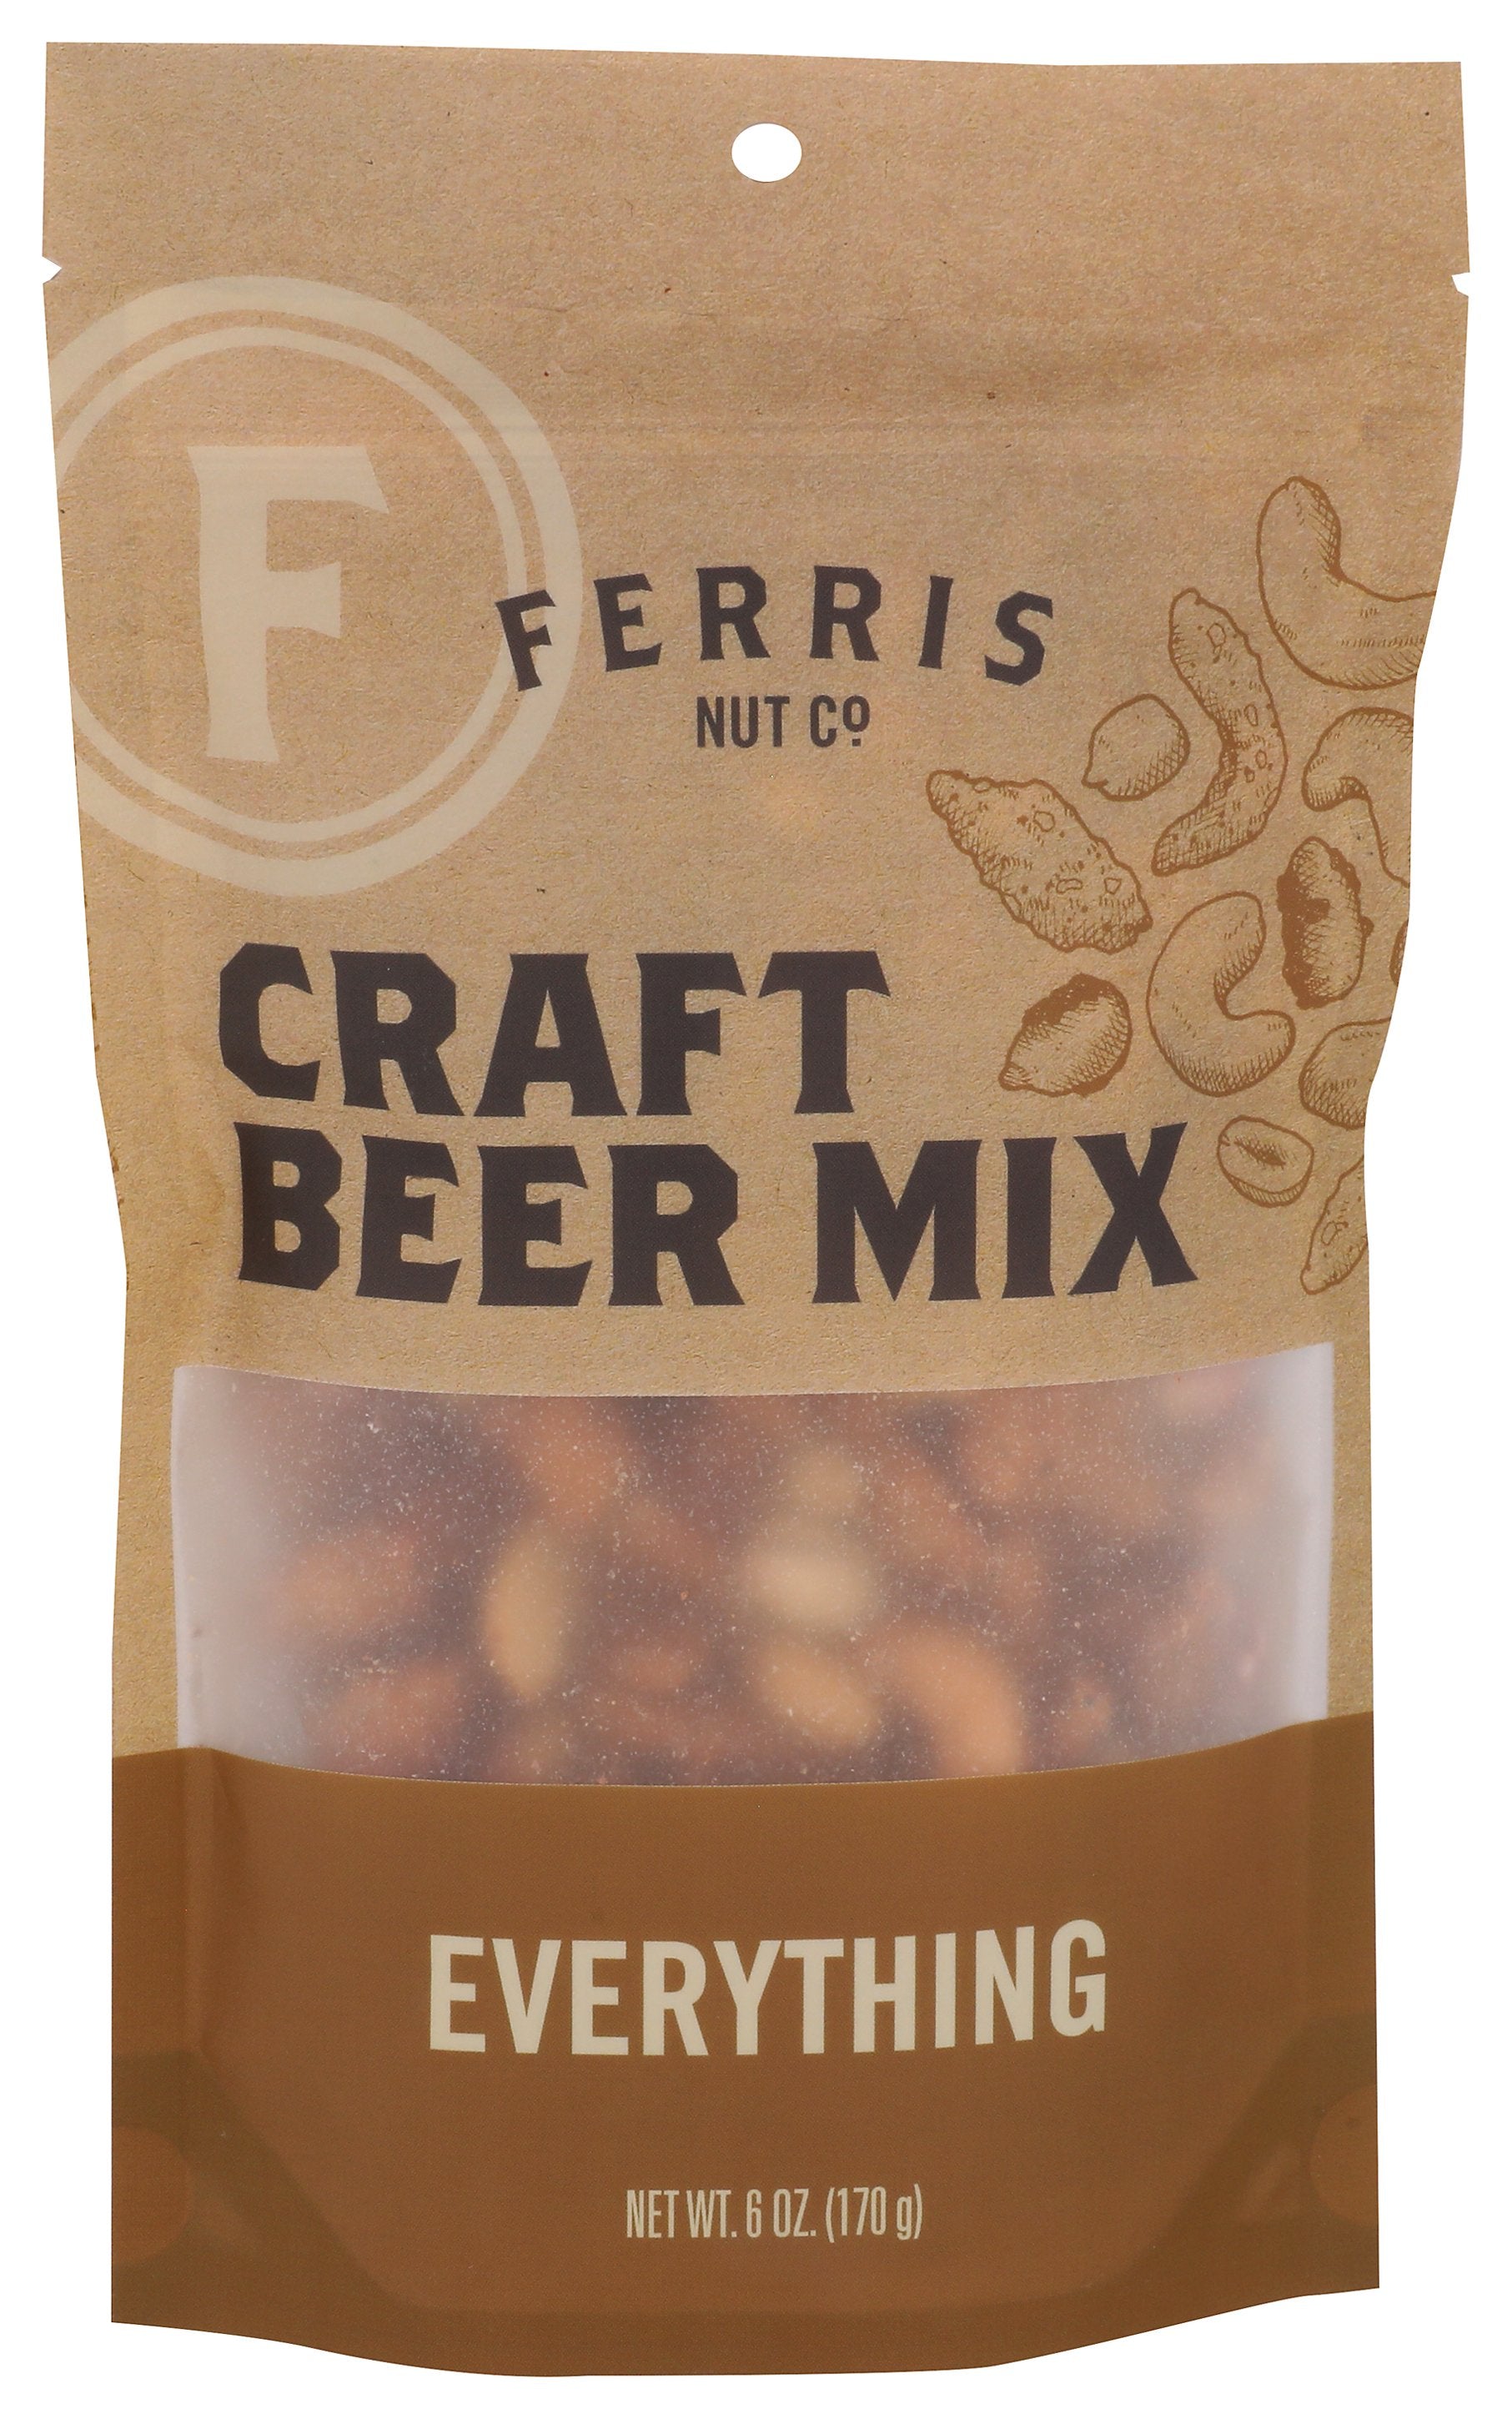 FERRIS EB TRAIL EVERYTHING BEER MIX - Case of 12